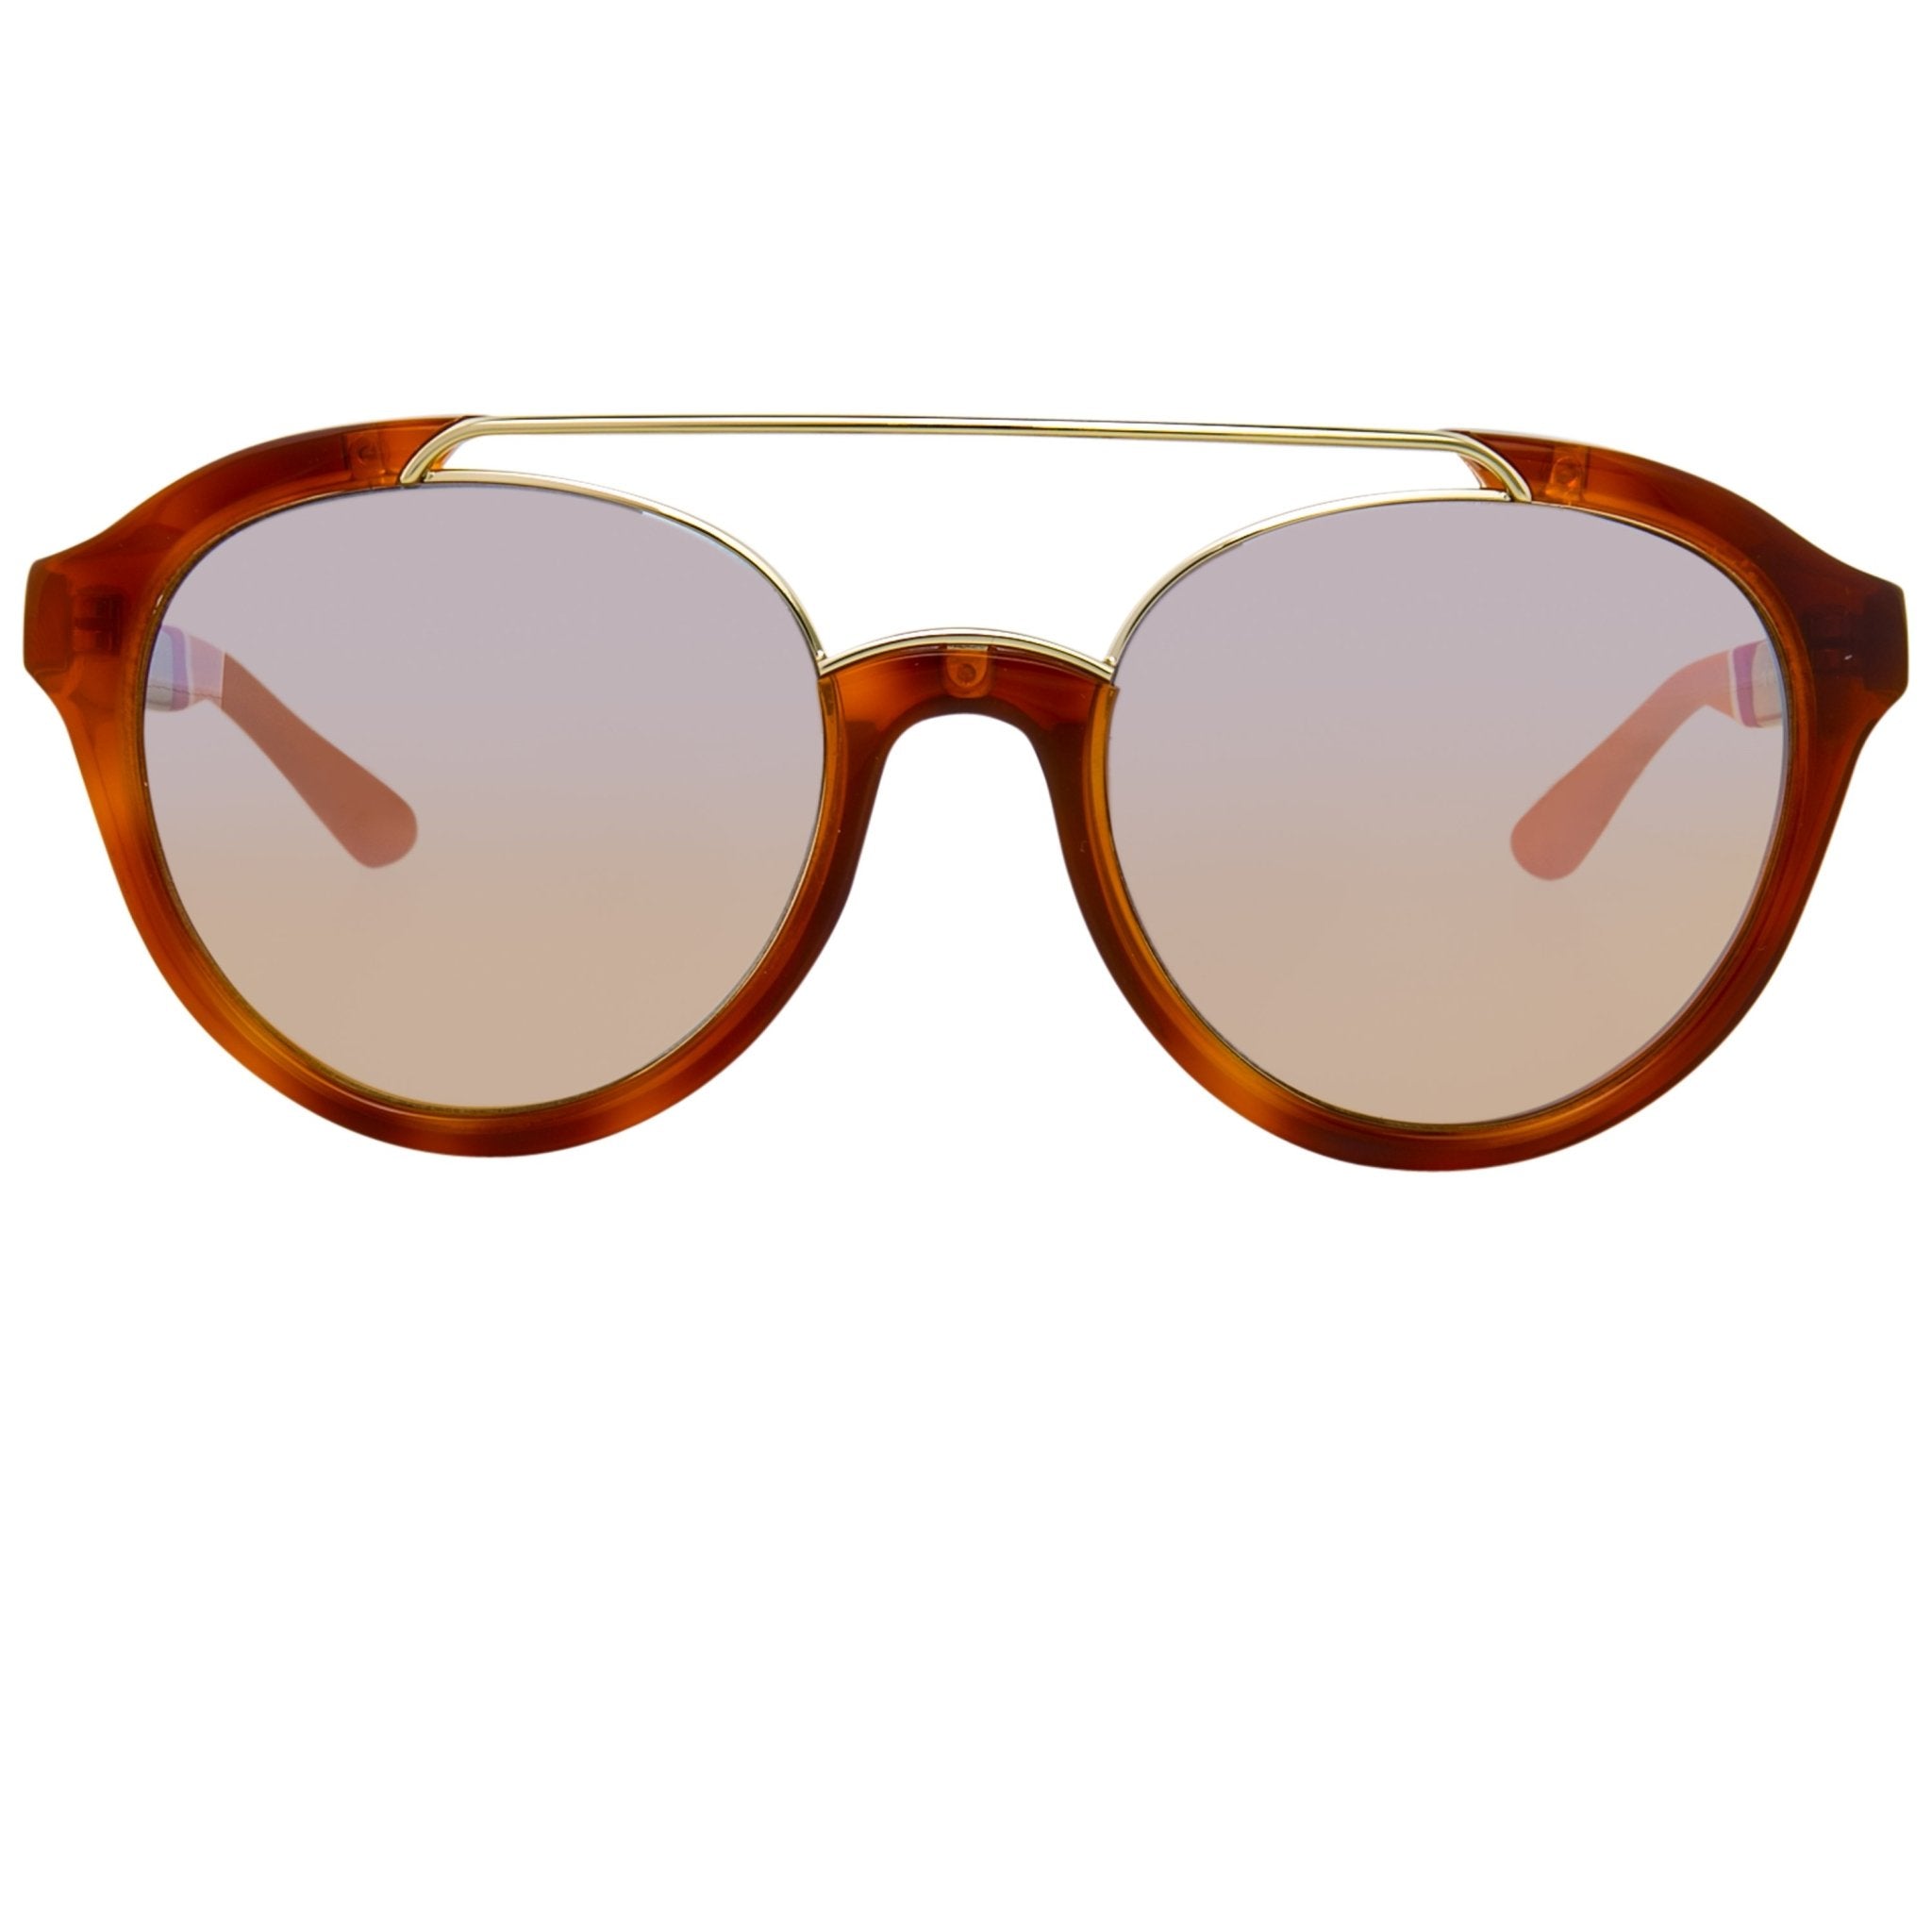 Orlebar Brown Sunglasses Oval Amber Tortise Shell with Orange Lenses OB42C3SUN - Watches & Crystals